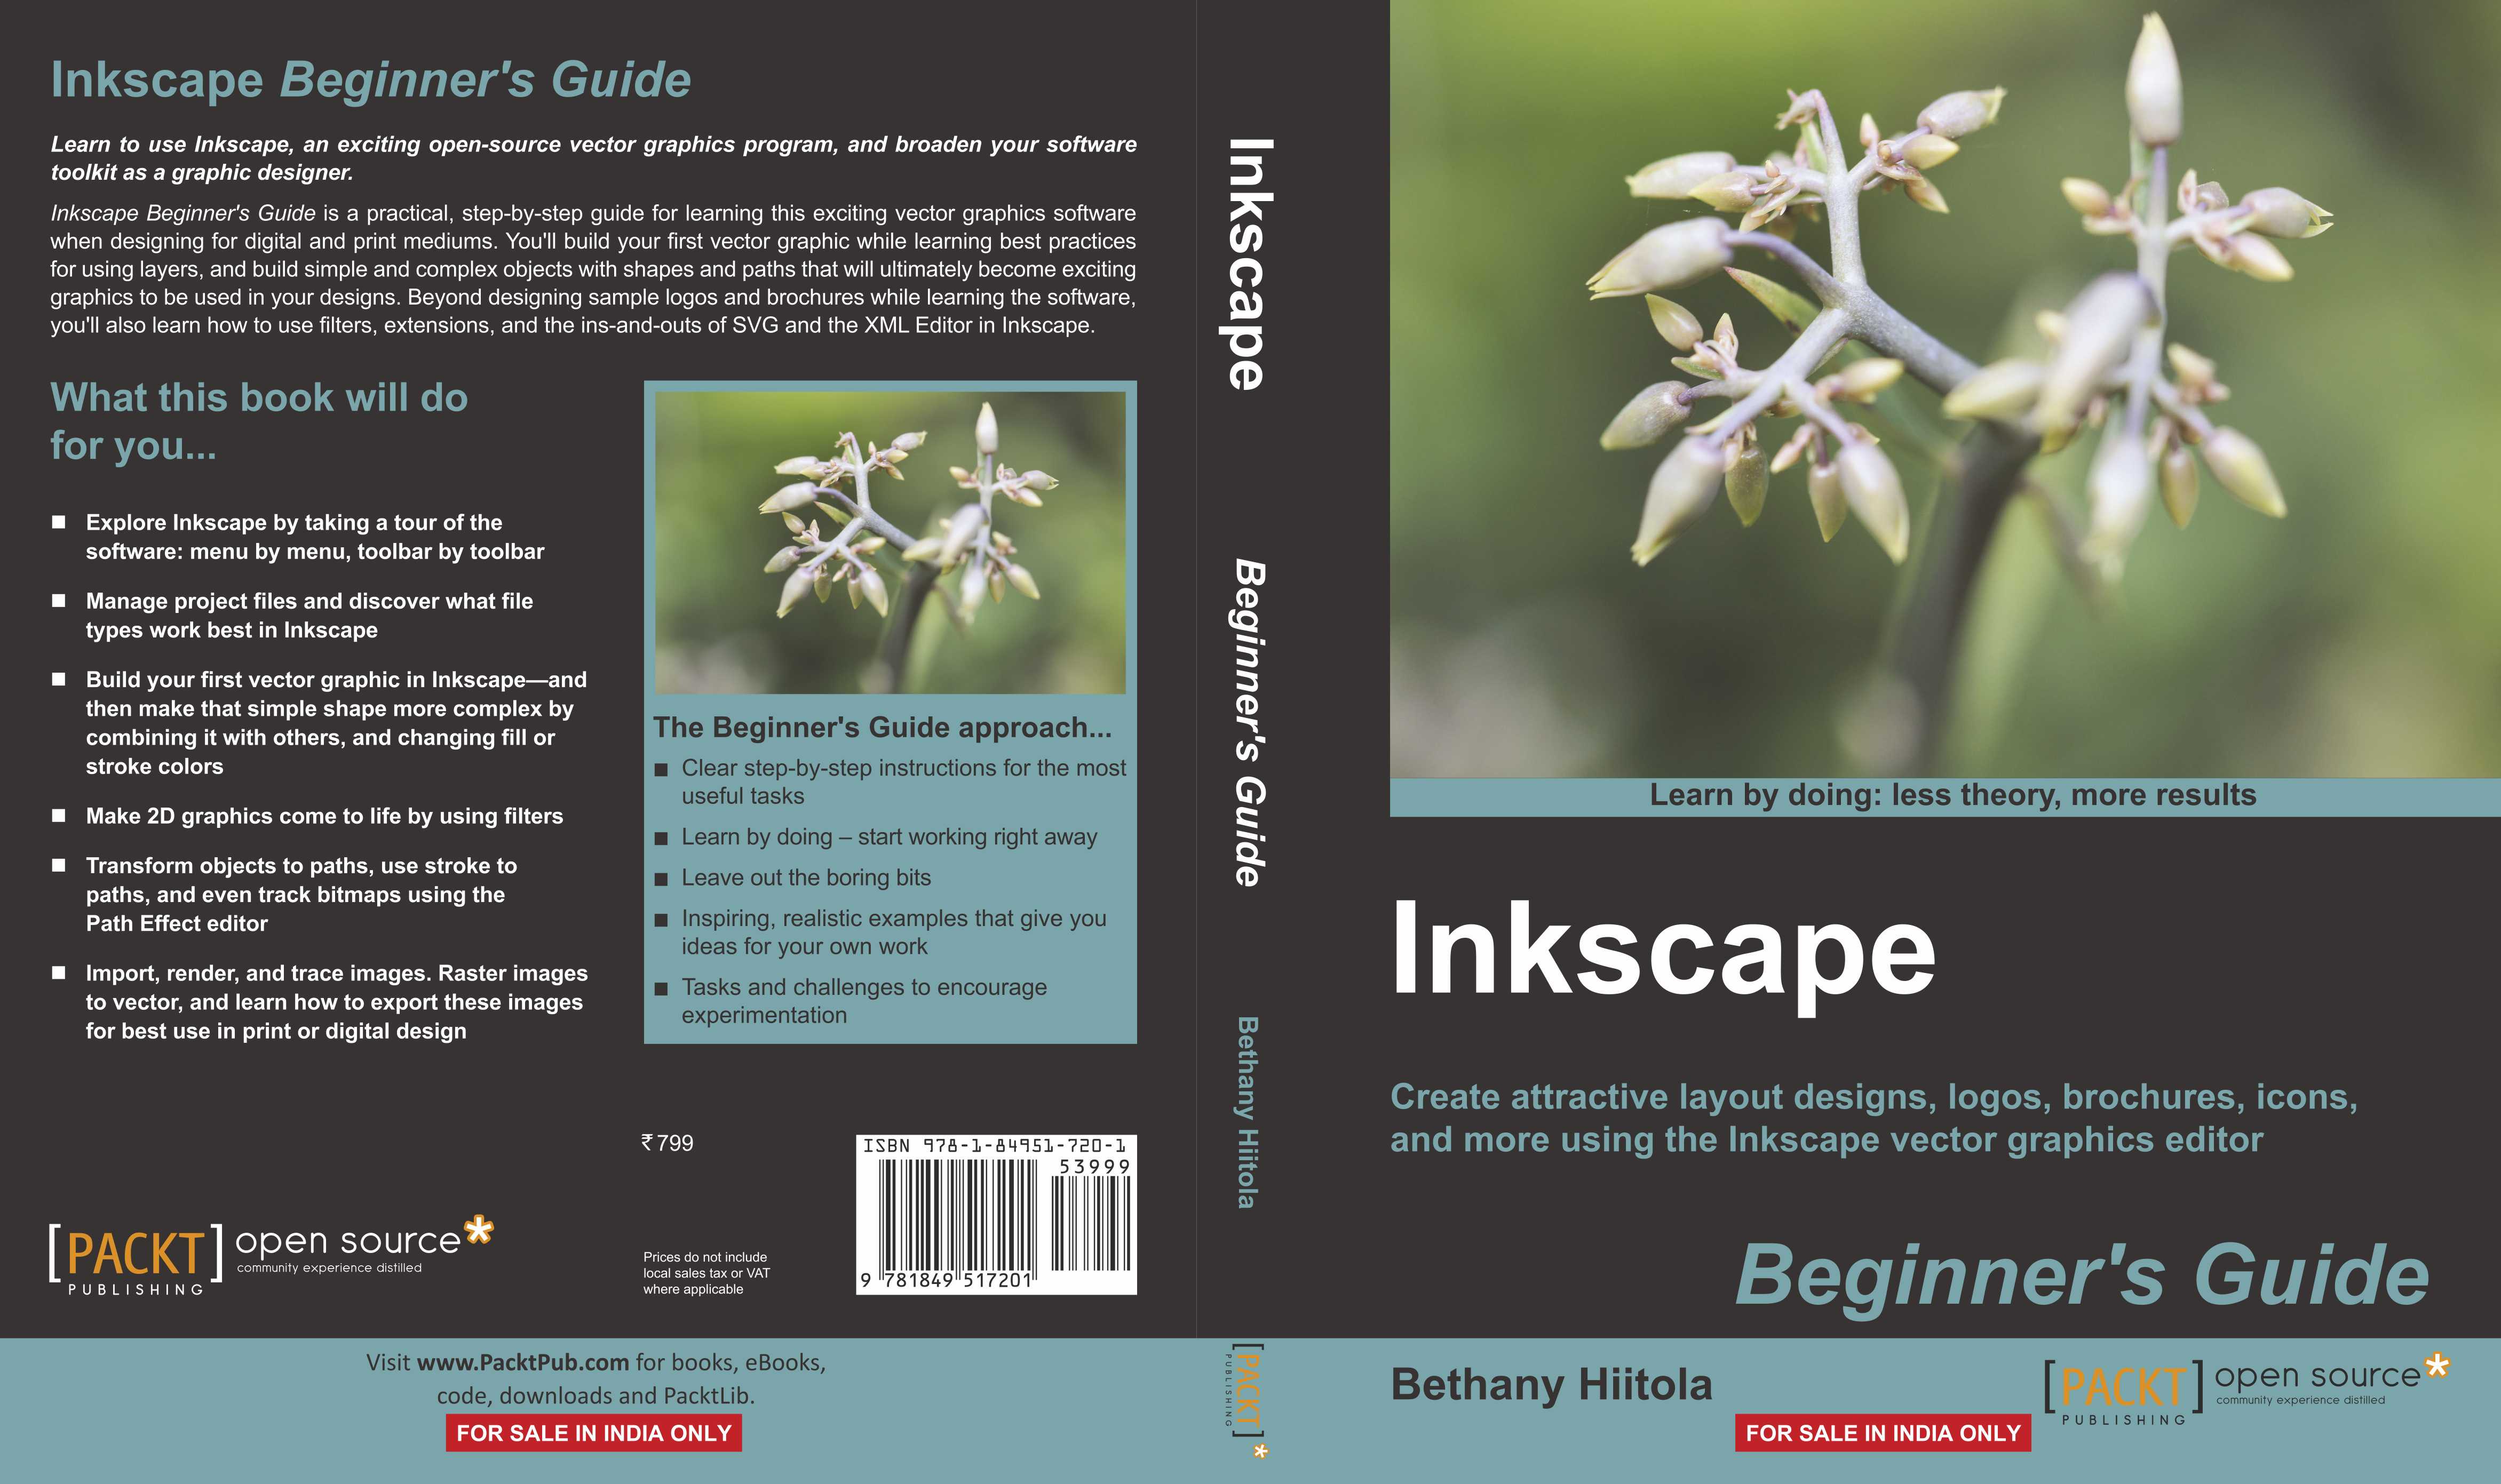 buy-inkscape-beginners-guide-online-799-from-shopclues